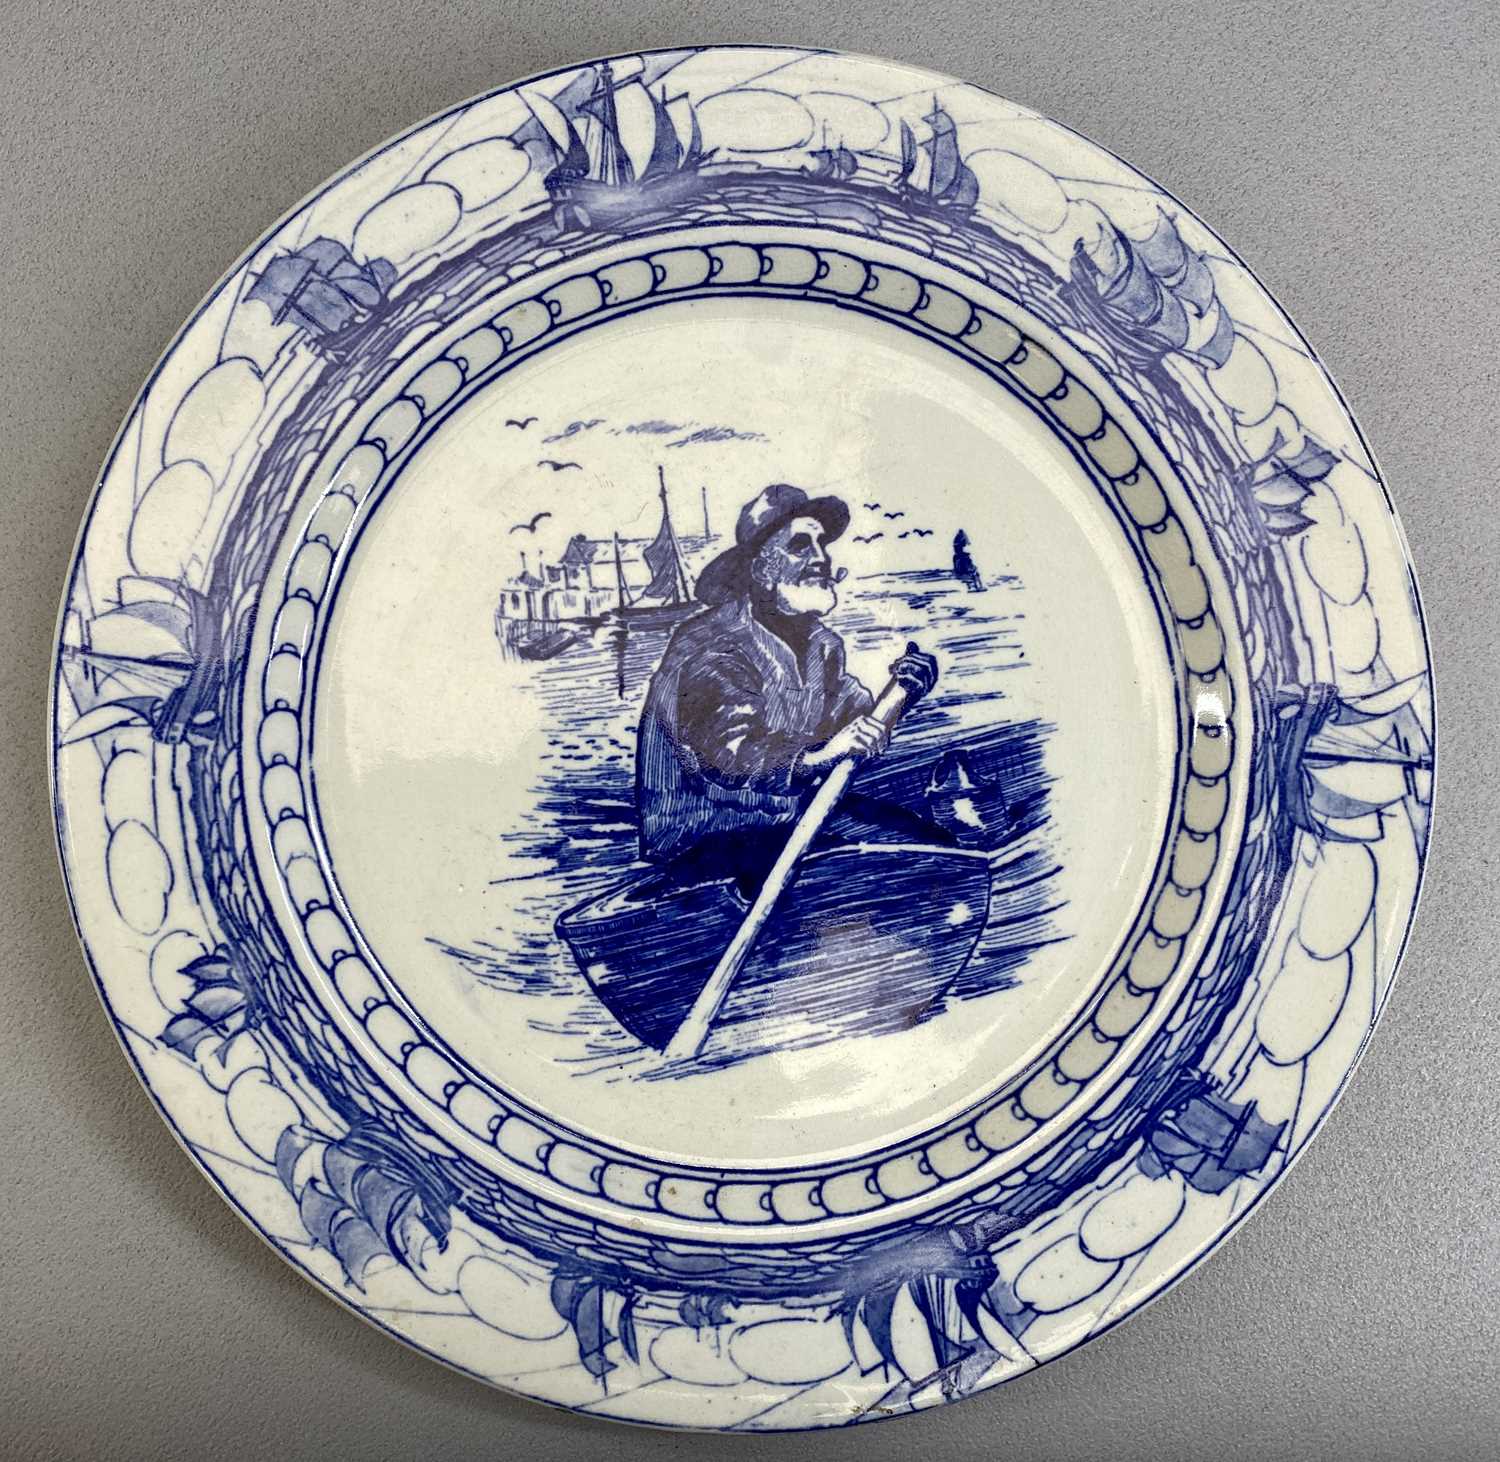 ROYAL DOULTON CIRCULAR BLUE & WHITE PLATE - with compliments from James Morris Burslem, Xmas 1910, - Image 4 of 13